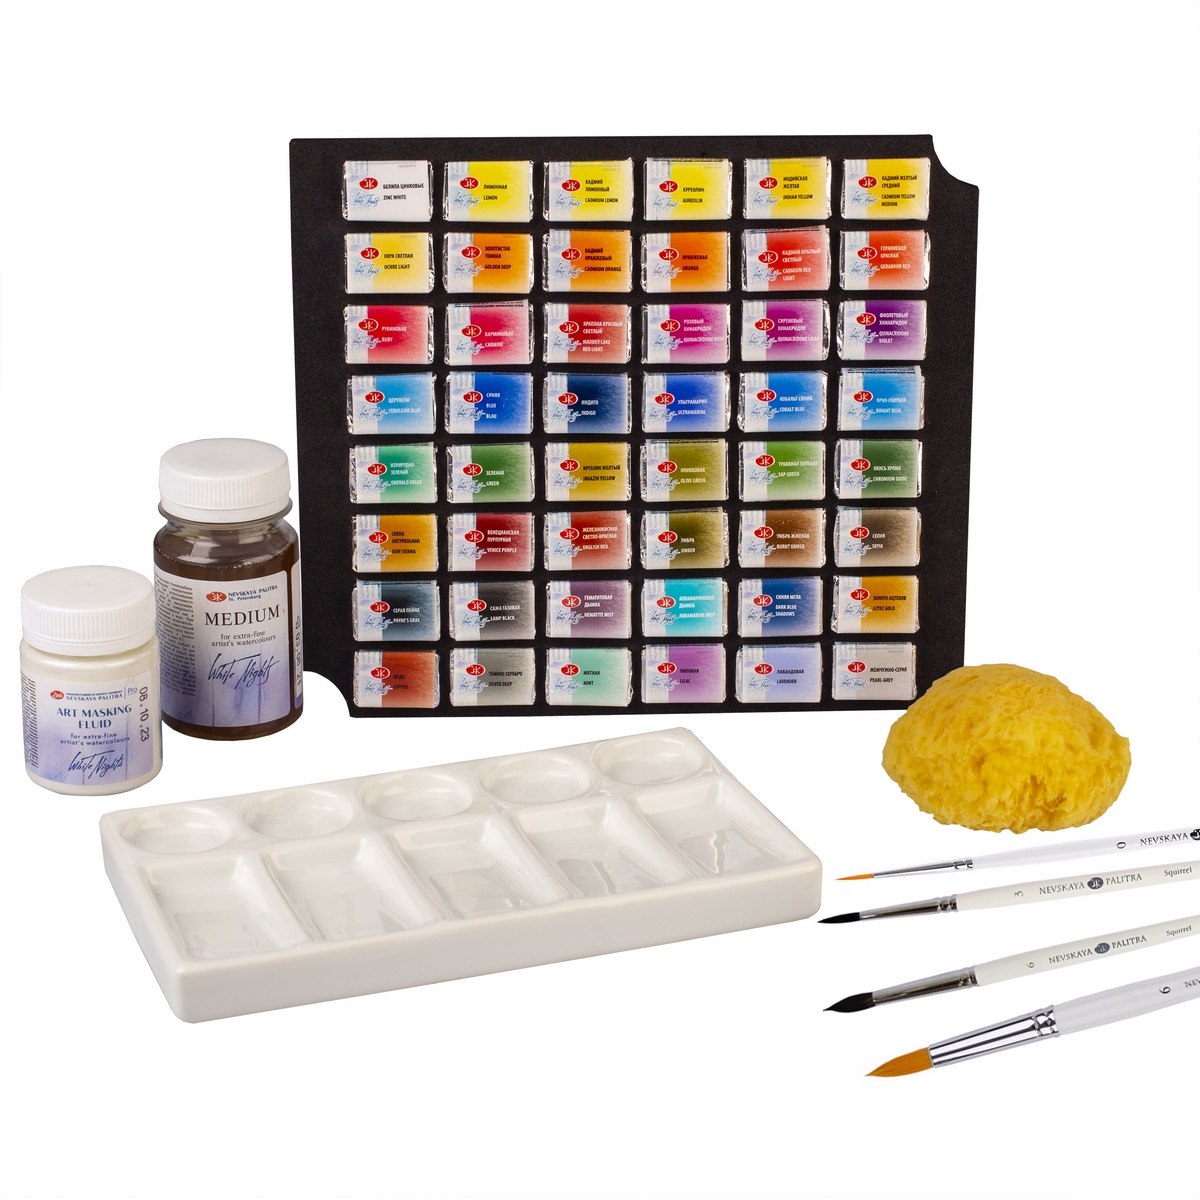 Watercolour set "White Nights" 48 pans, auxiliary materials, accessories, blue wooden box